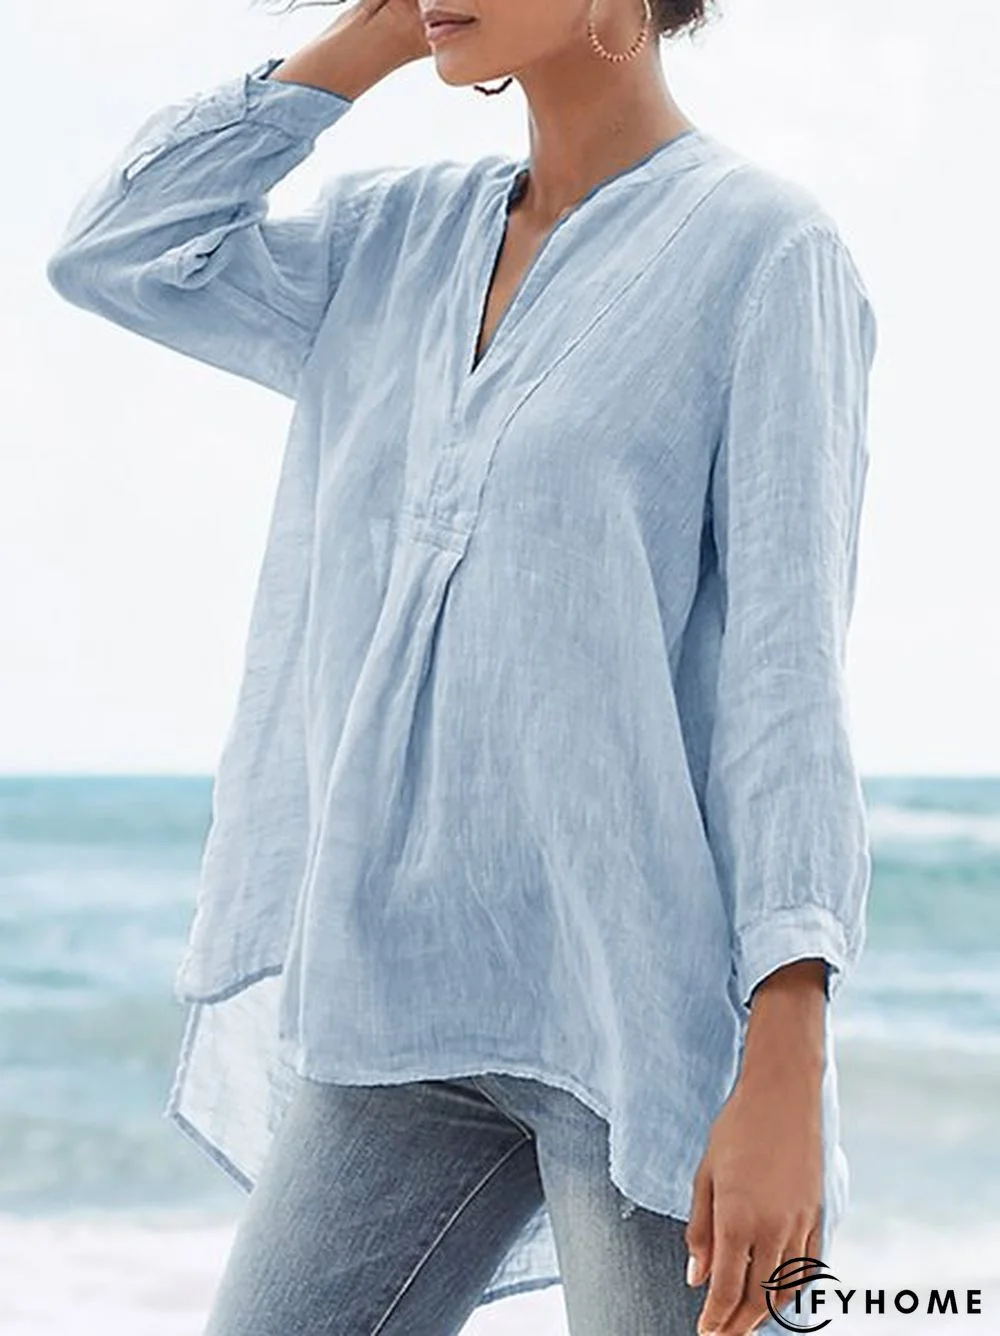 V Neck Casual 3/4 Sleeve Plus Size Shirts for Women | IFYHOME